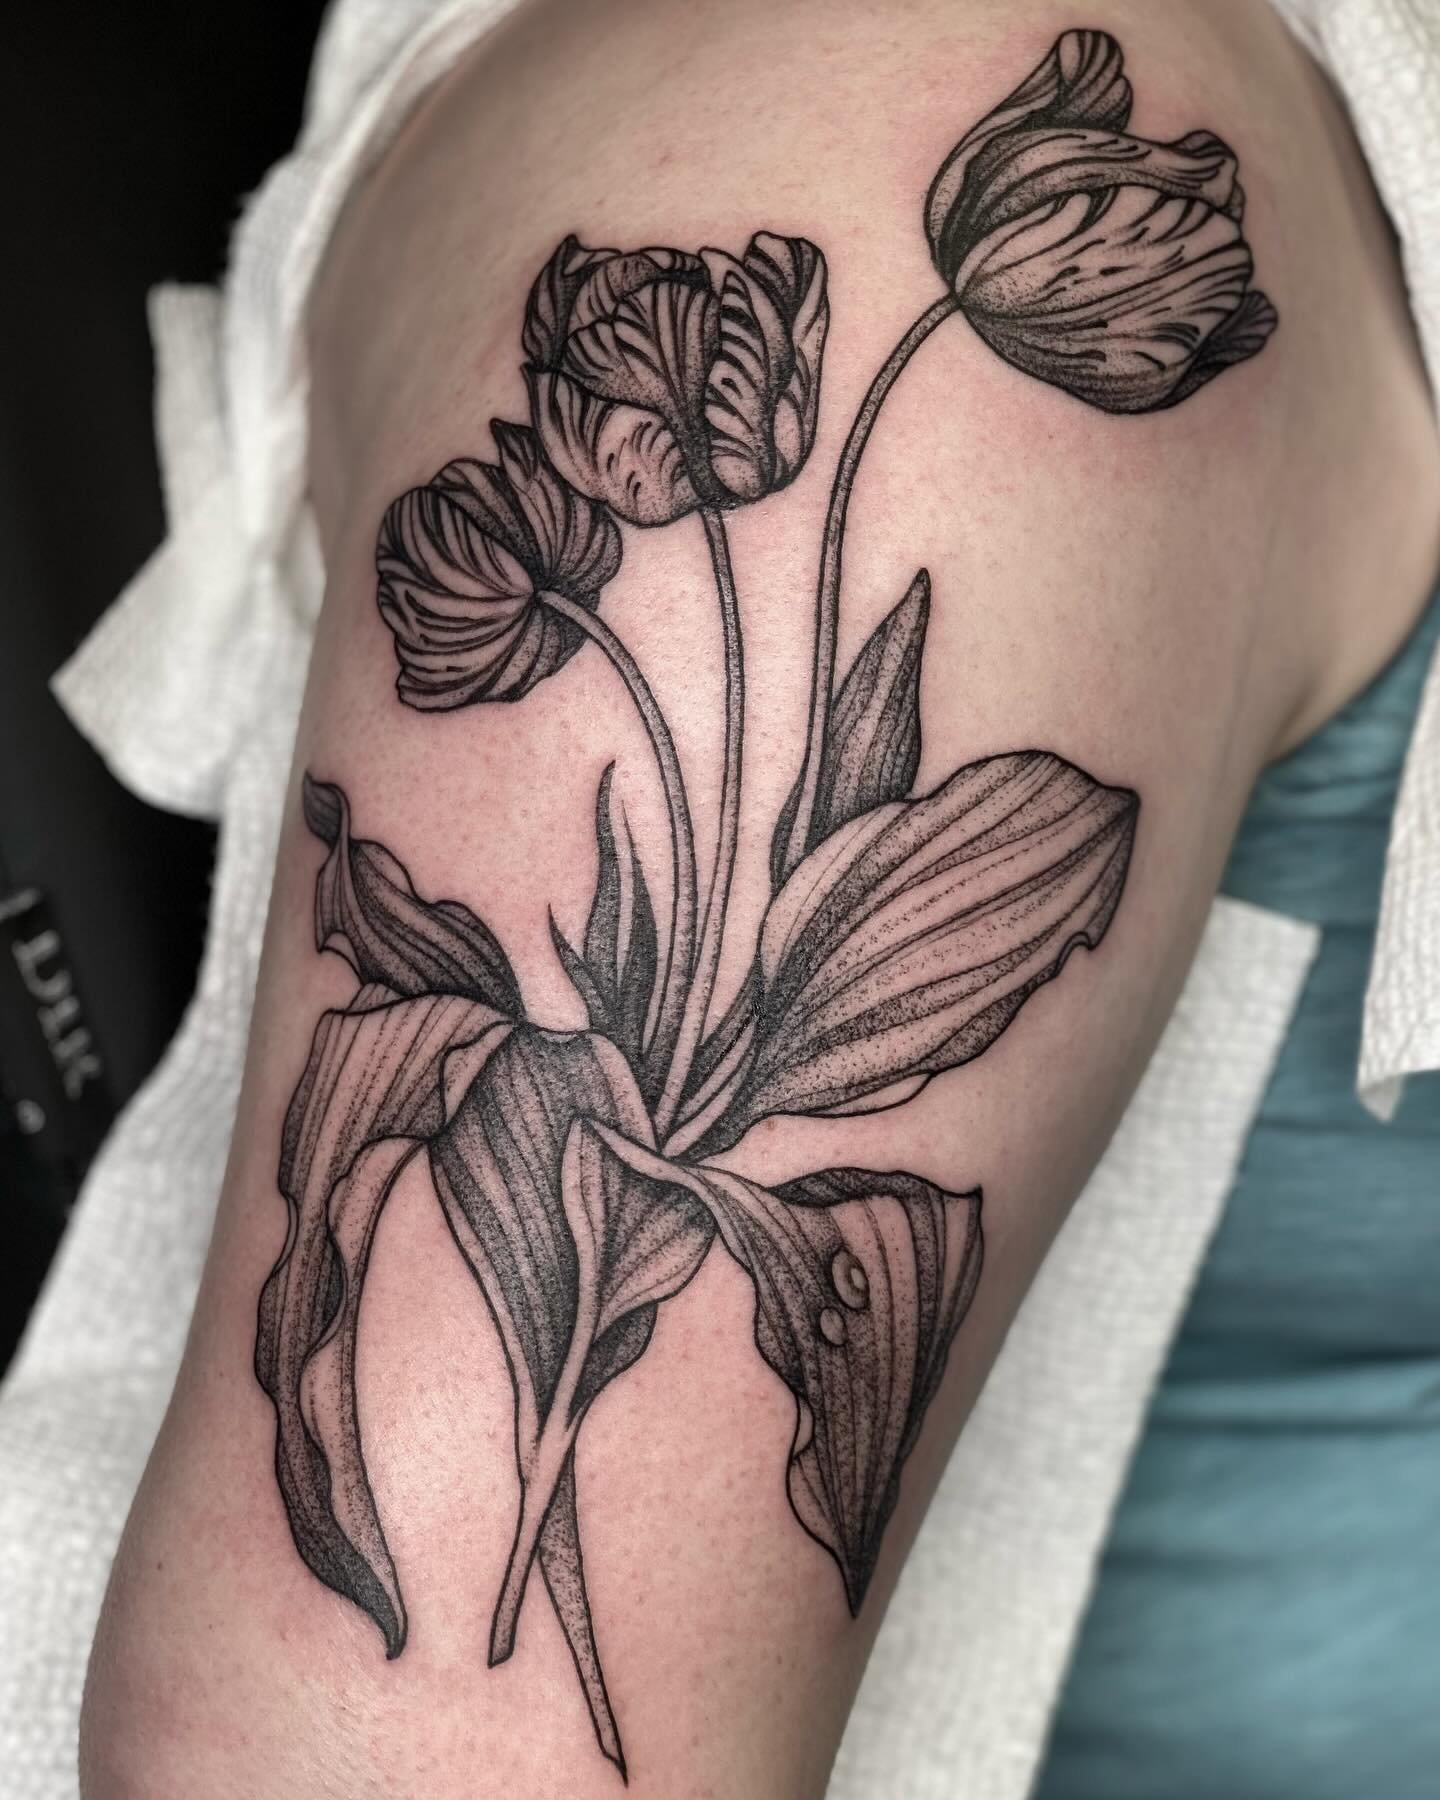 Thanks for the trust and making the trip Sarah! I love tulips 🌷 
.
.
.
#newyorktattoo#newyorktattooartist#nytattoo#nytattooer#newyorktattooer#botanicaltattoo#botanicaltattooer#botanicaltattoos#longislandtattoo#longislandtattooer#longislandtattooarti